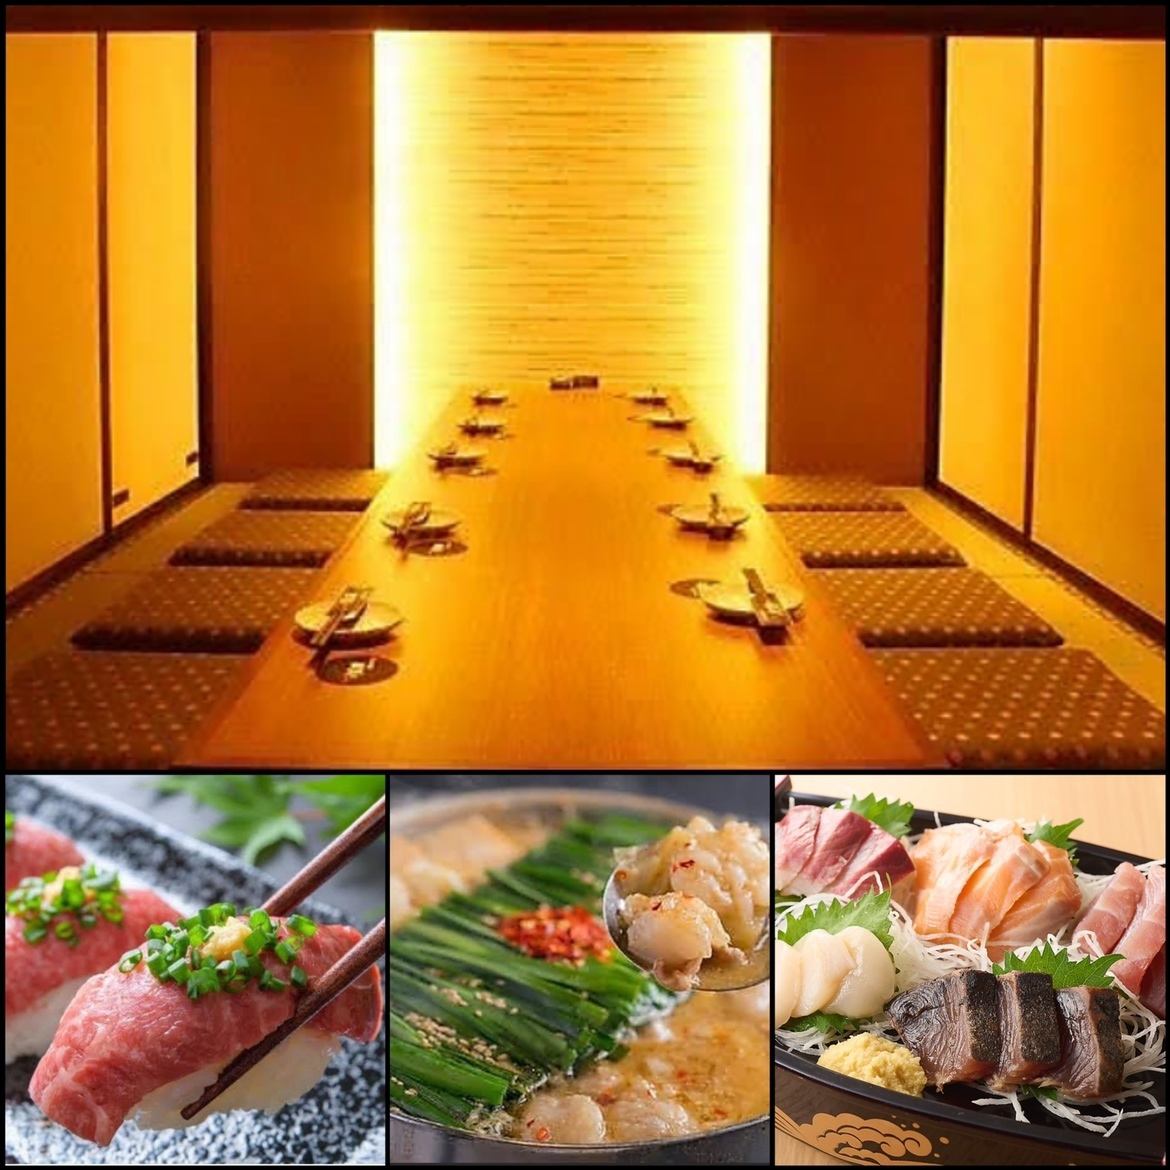 Enjoy exquisite meat and fish dishes in a completely private horigotatsu table♪